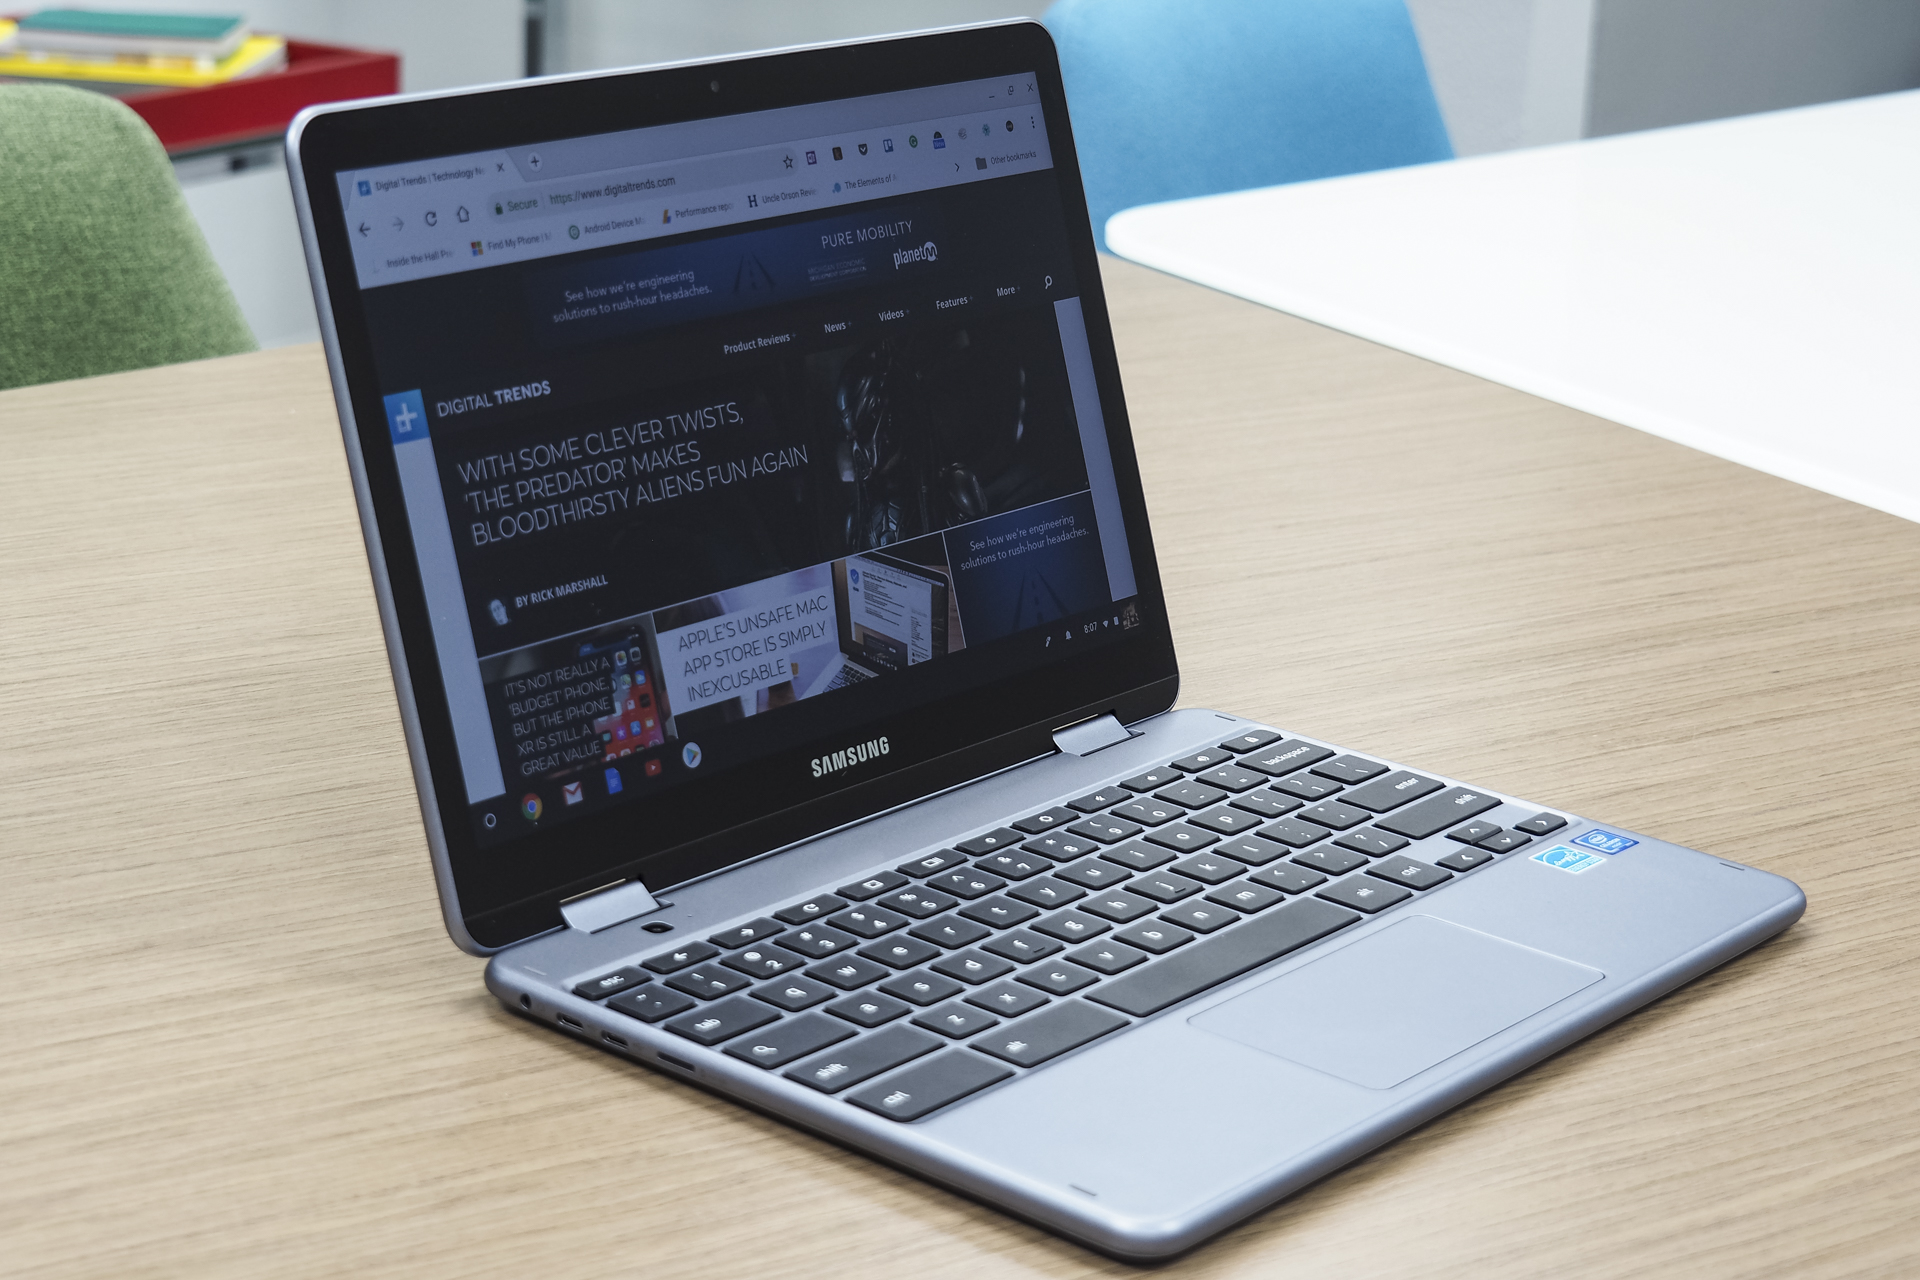 Samsung Chromebook Plus Review. As I've mentioned before